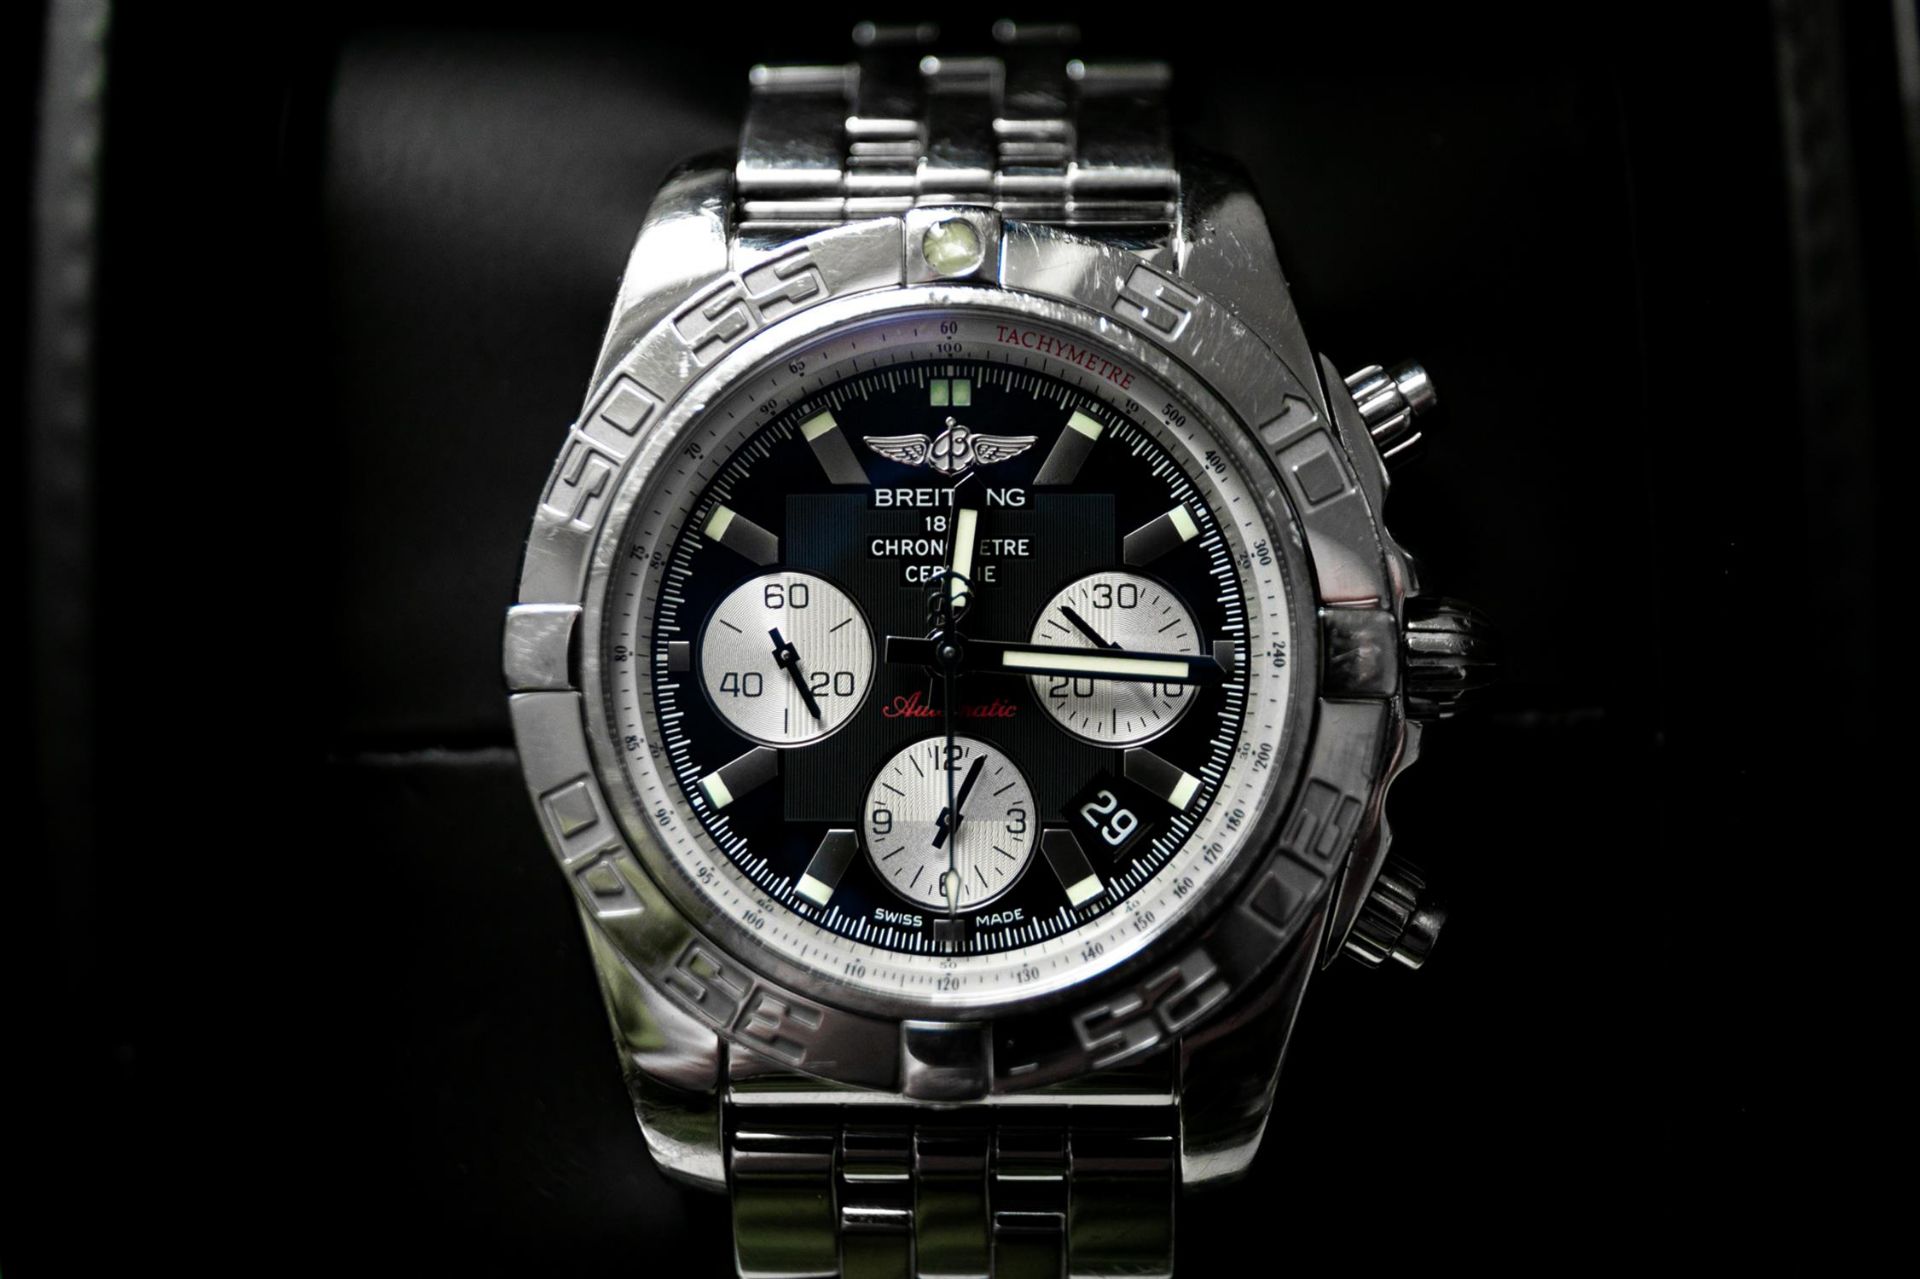 Breitling Chronomat 44 AB0110 Stainless Steel Watch - Image 3 of 10